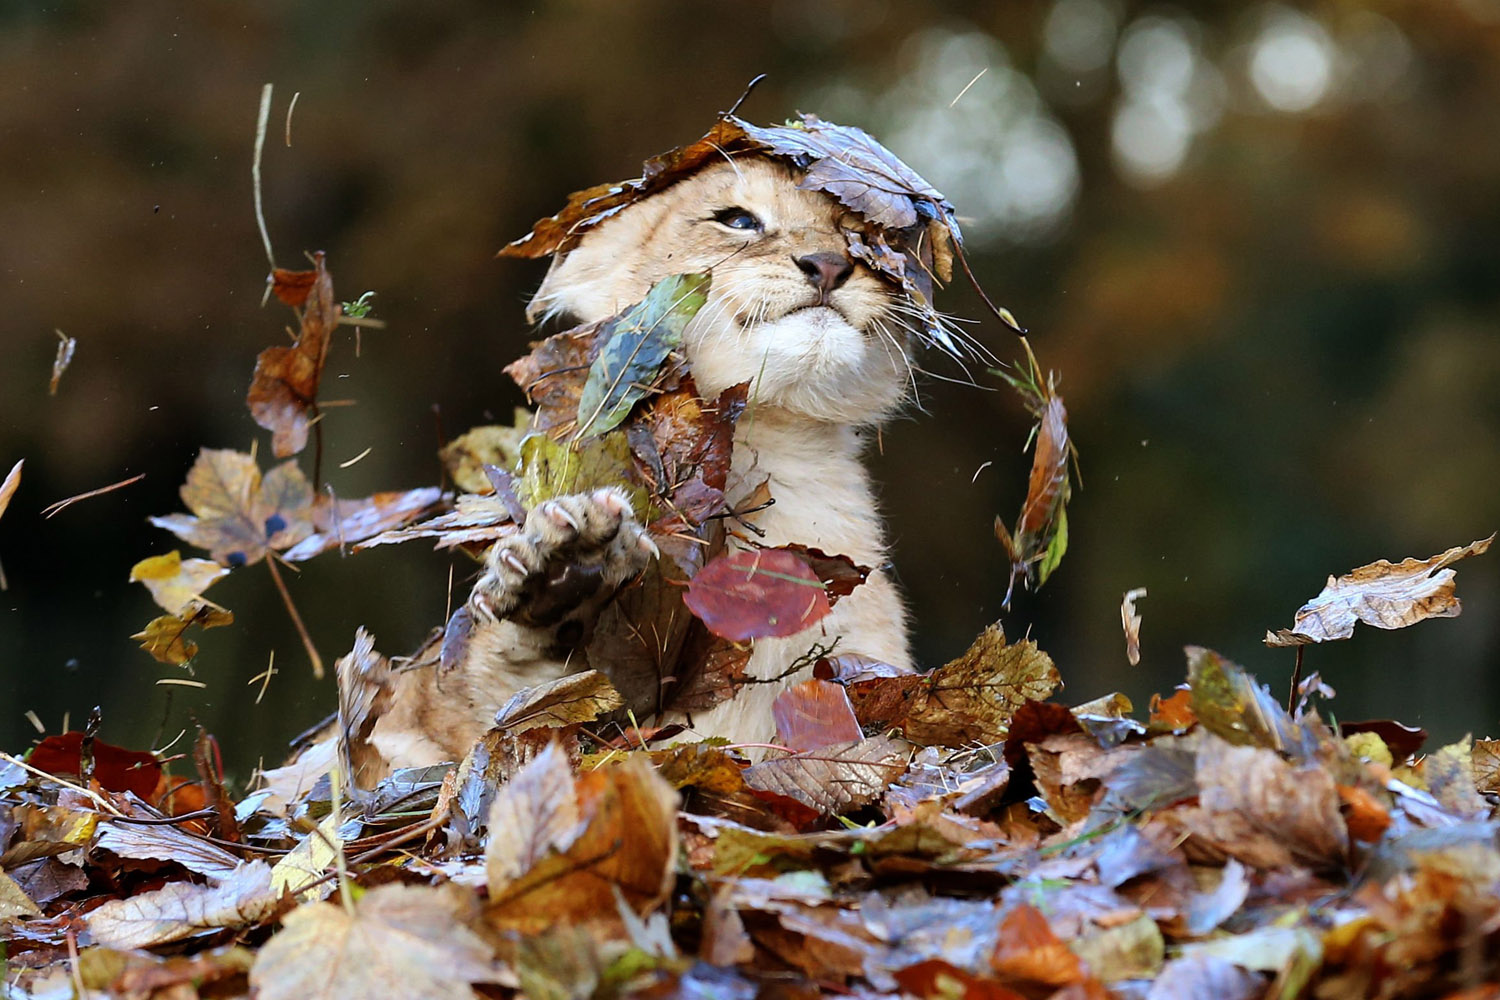 Nov. 20, 2013. Karis, an eleven week old lion cub, plays in fallen leaves brushed up by keepers in her enclosure at Blair Drummond Safari Park, near Stirling, central Scotland.